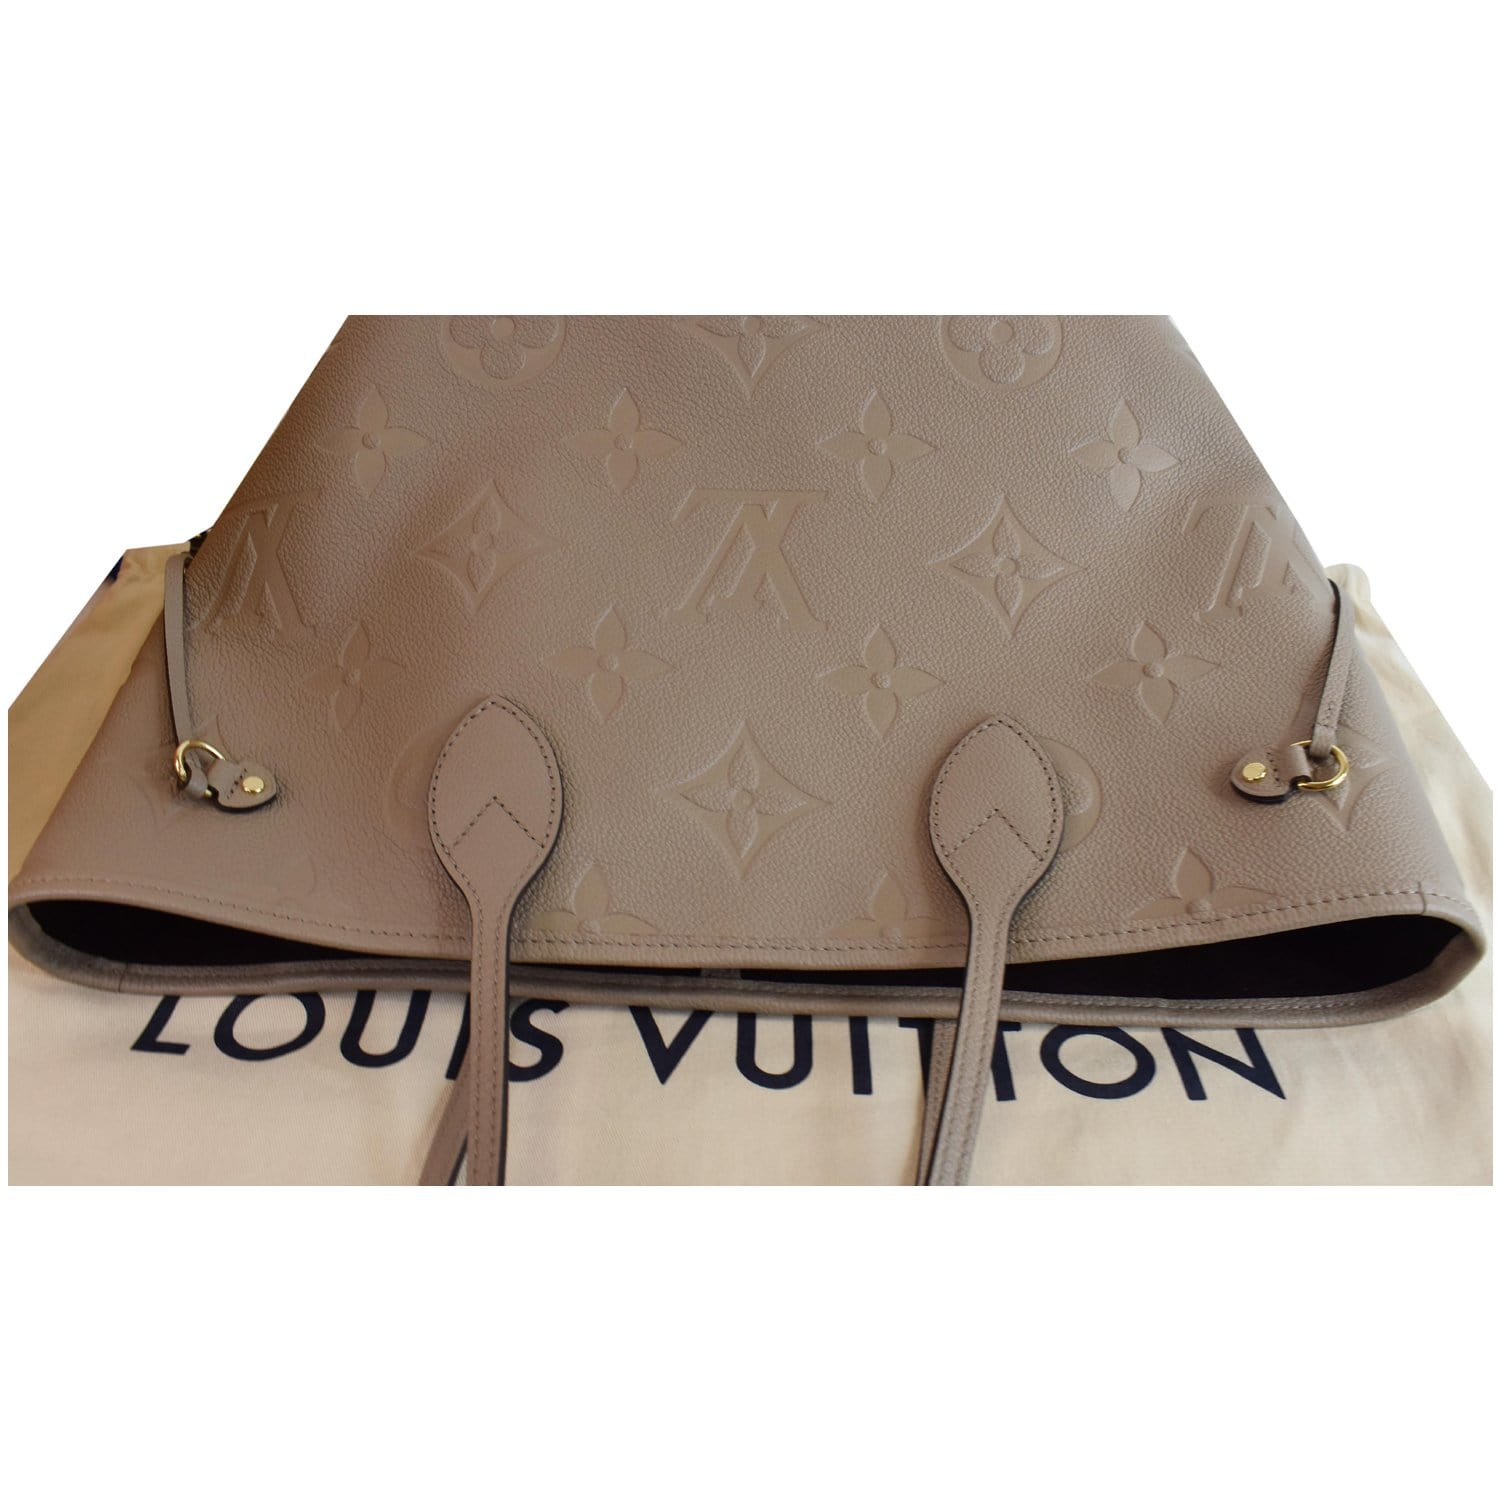 LOUIS VUITTON Neverfull MM Empreinte Leather Crème Store Display Sold Out!